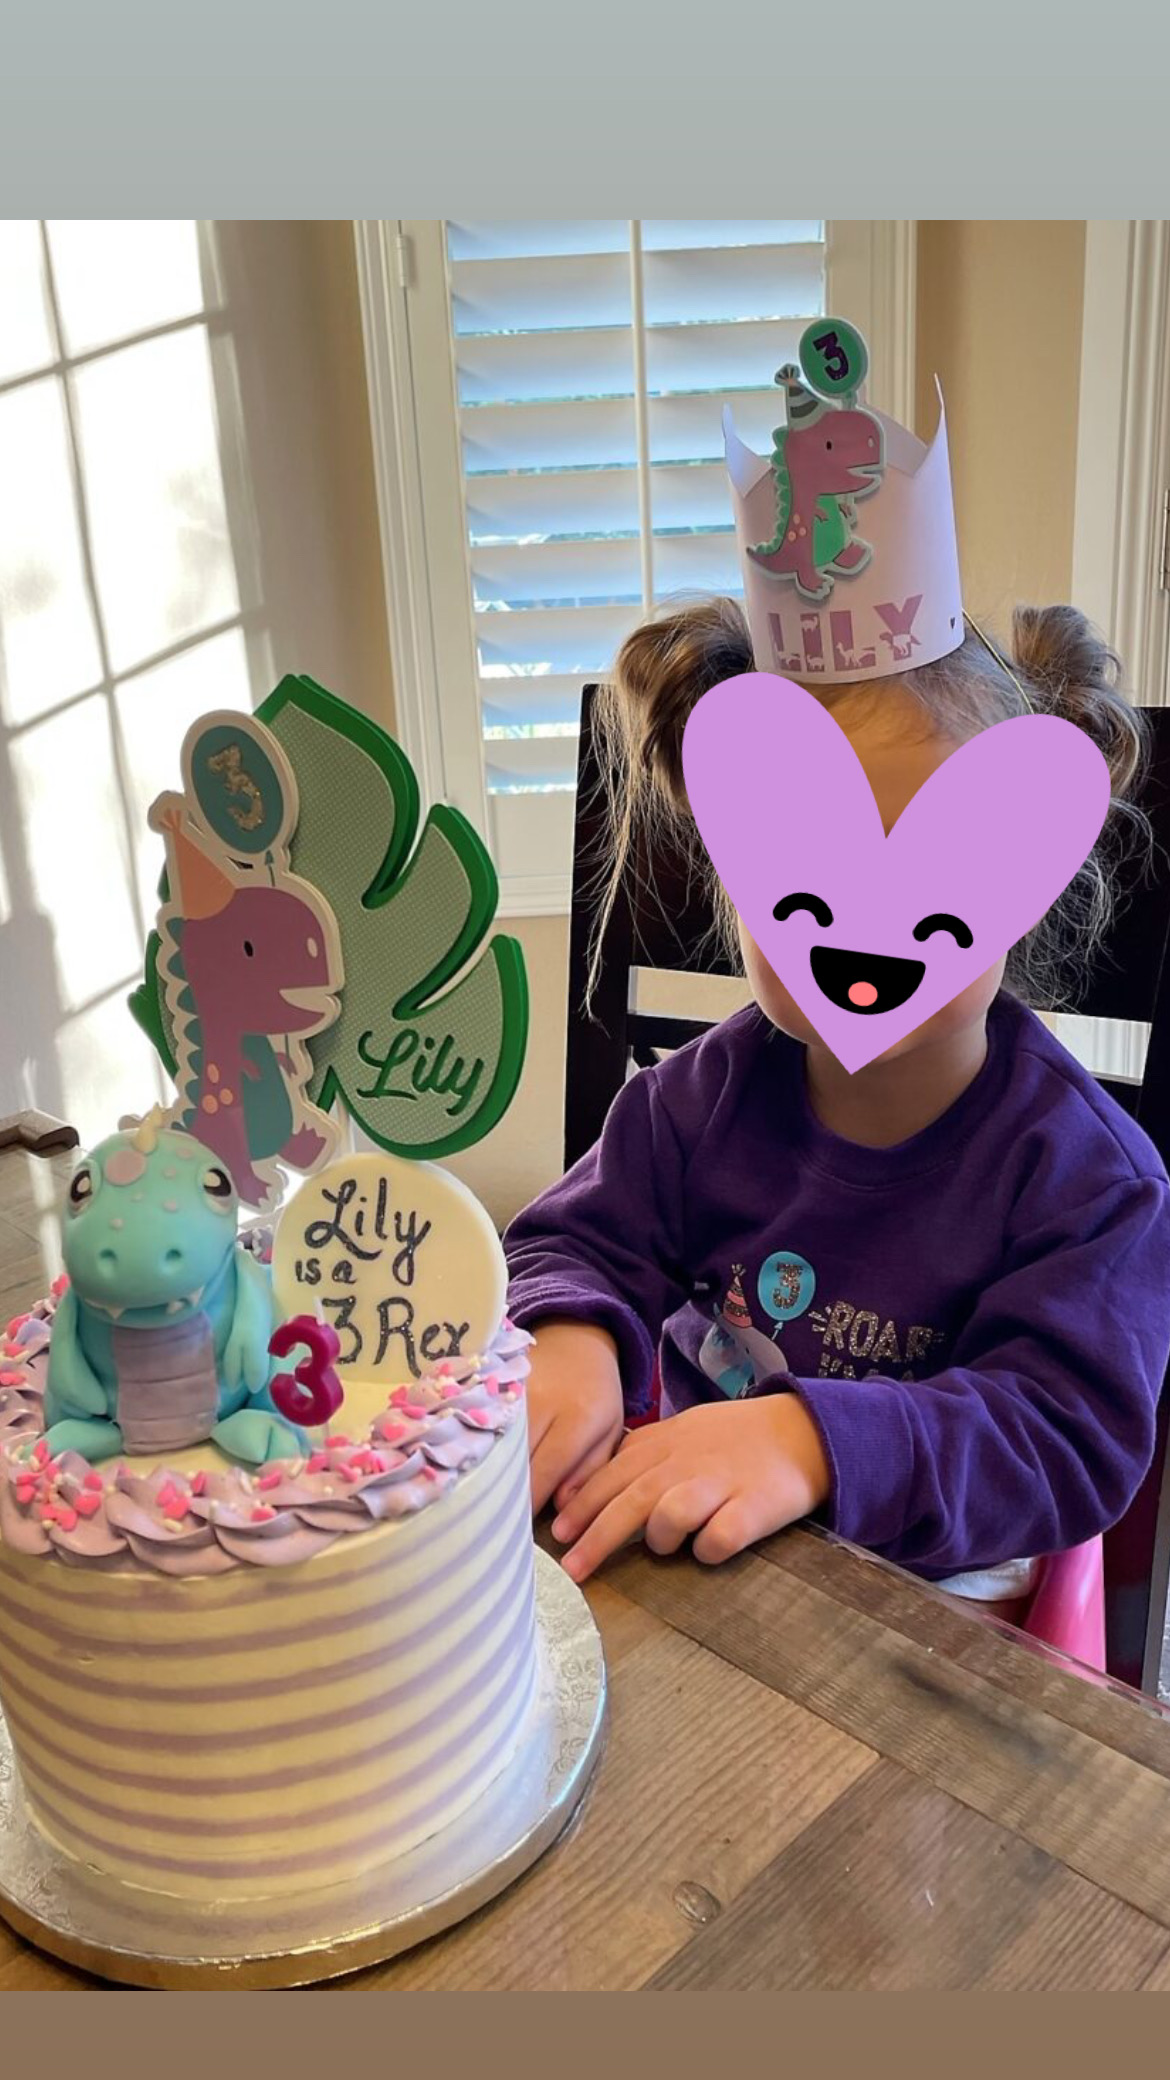 Toddler with purple heart over her face in front of a dinosaur birthday cake